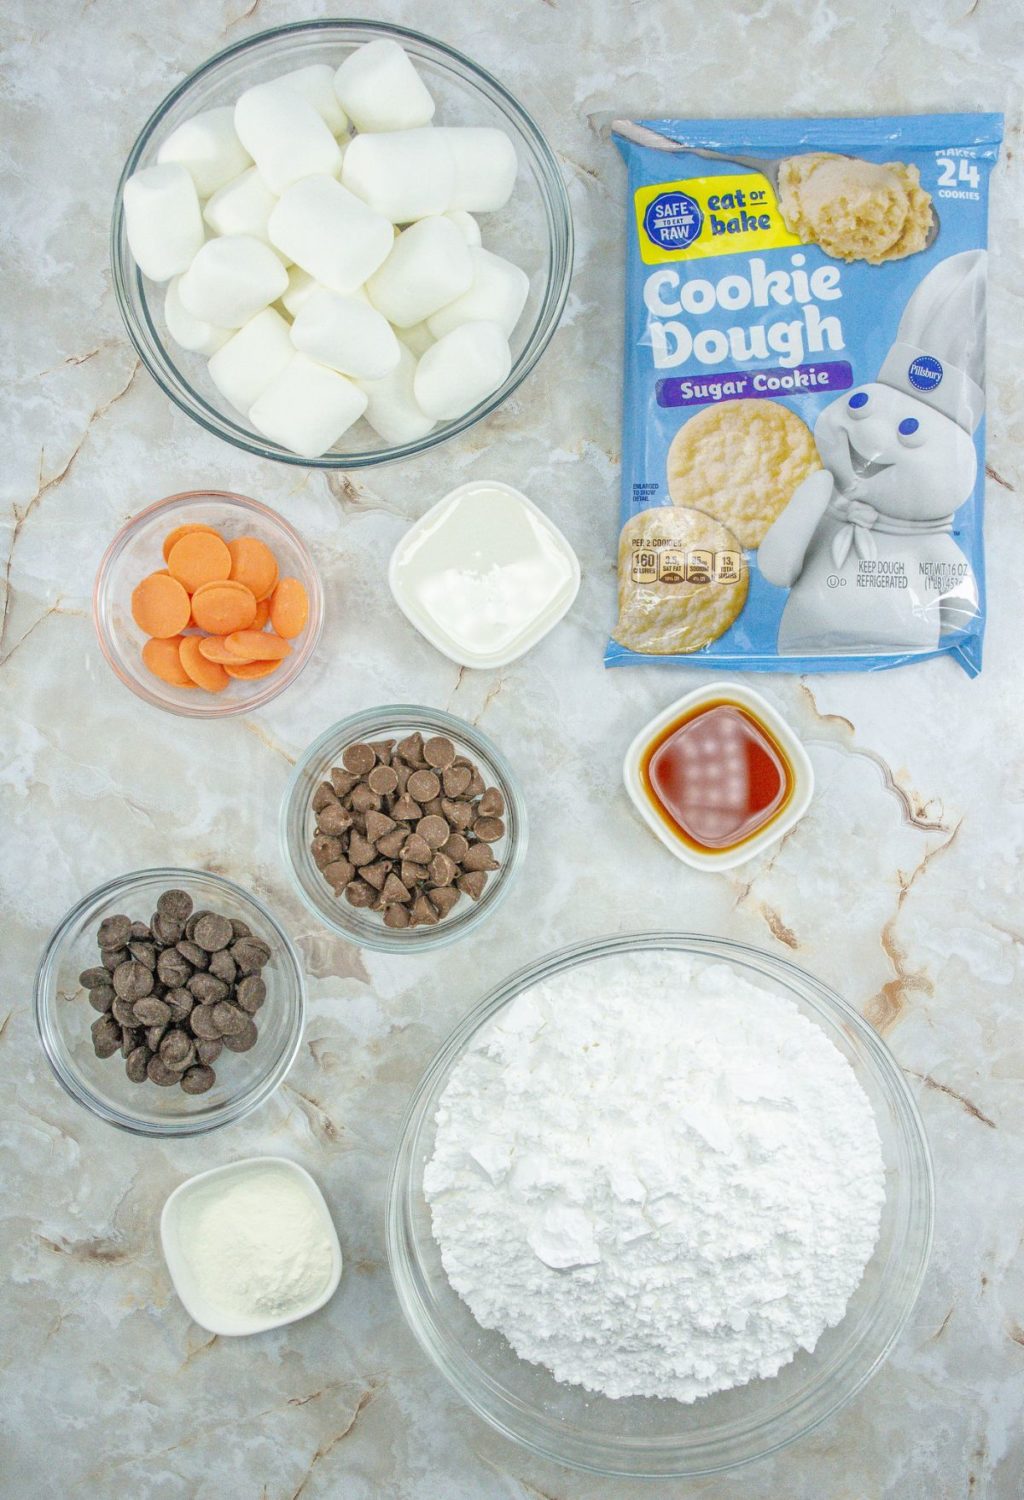 Marshmallow cookie dough ingredients on a marble countertop.